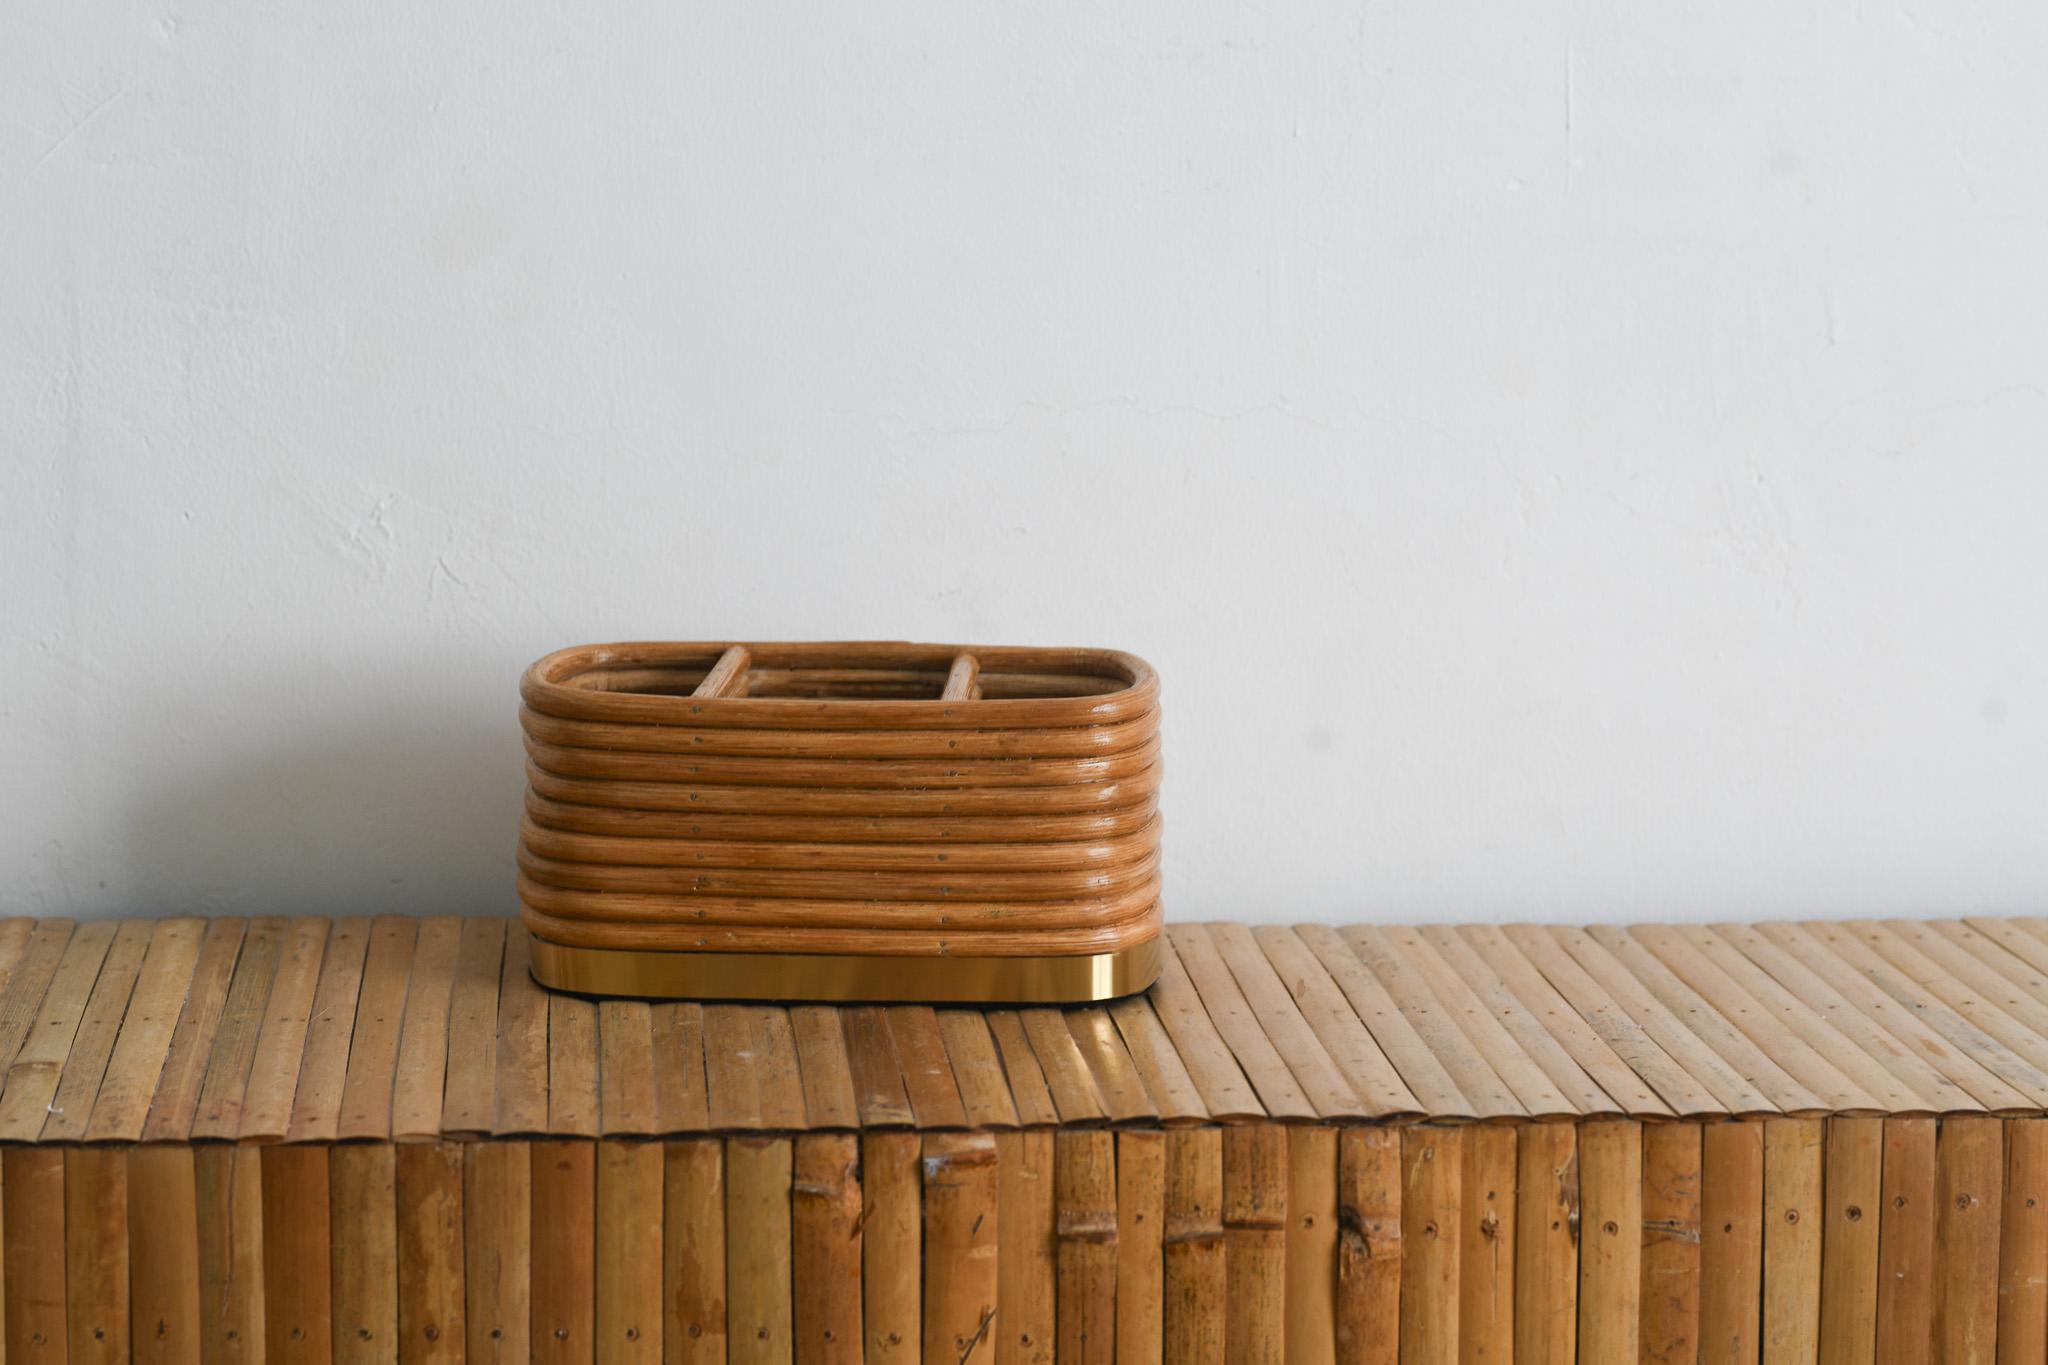 This elegant mid century modern rattan pencil reed desk organizer features a beautiful texture and gold accents. Its three compartments offer practical storage while its rectangular shape with curved edges adds a touch of sophistication to any